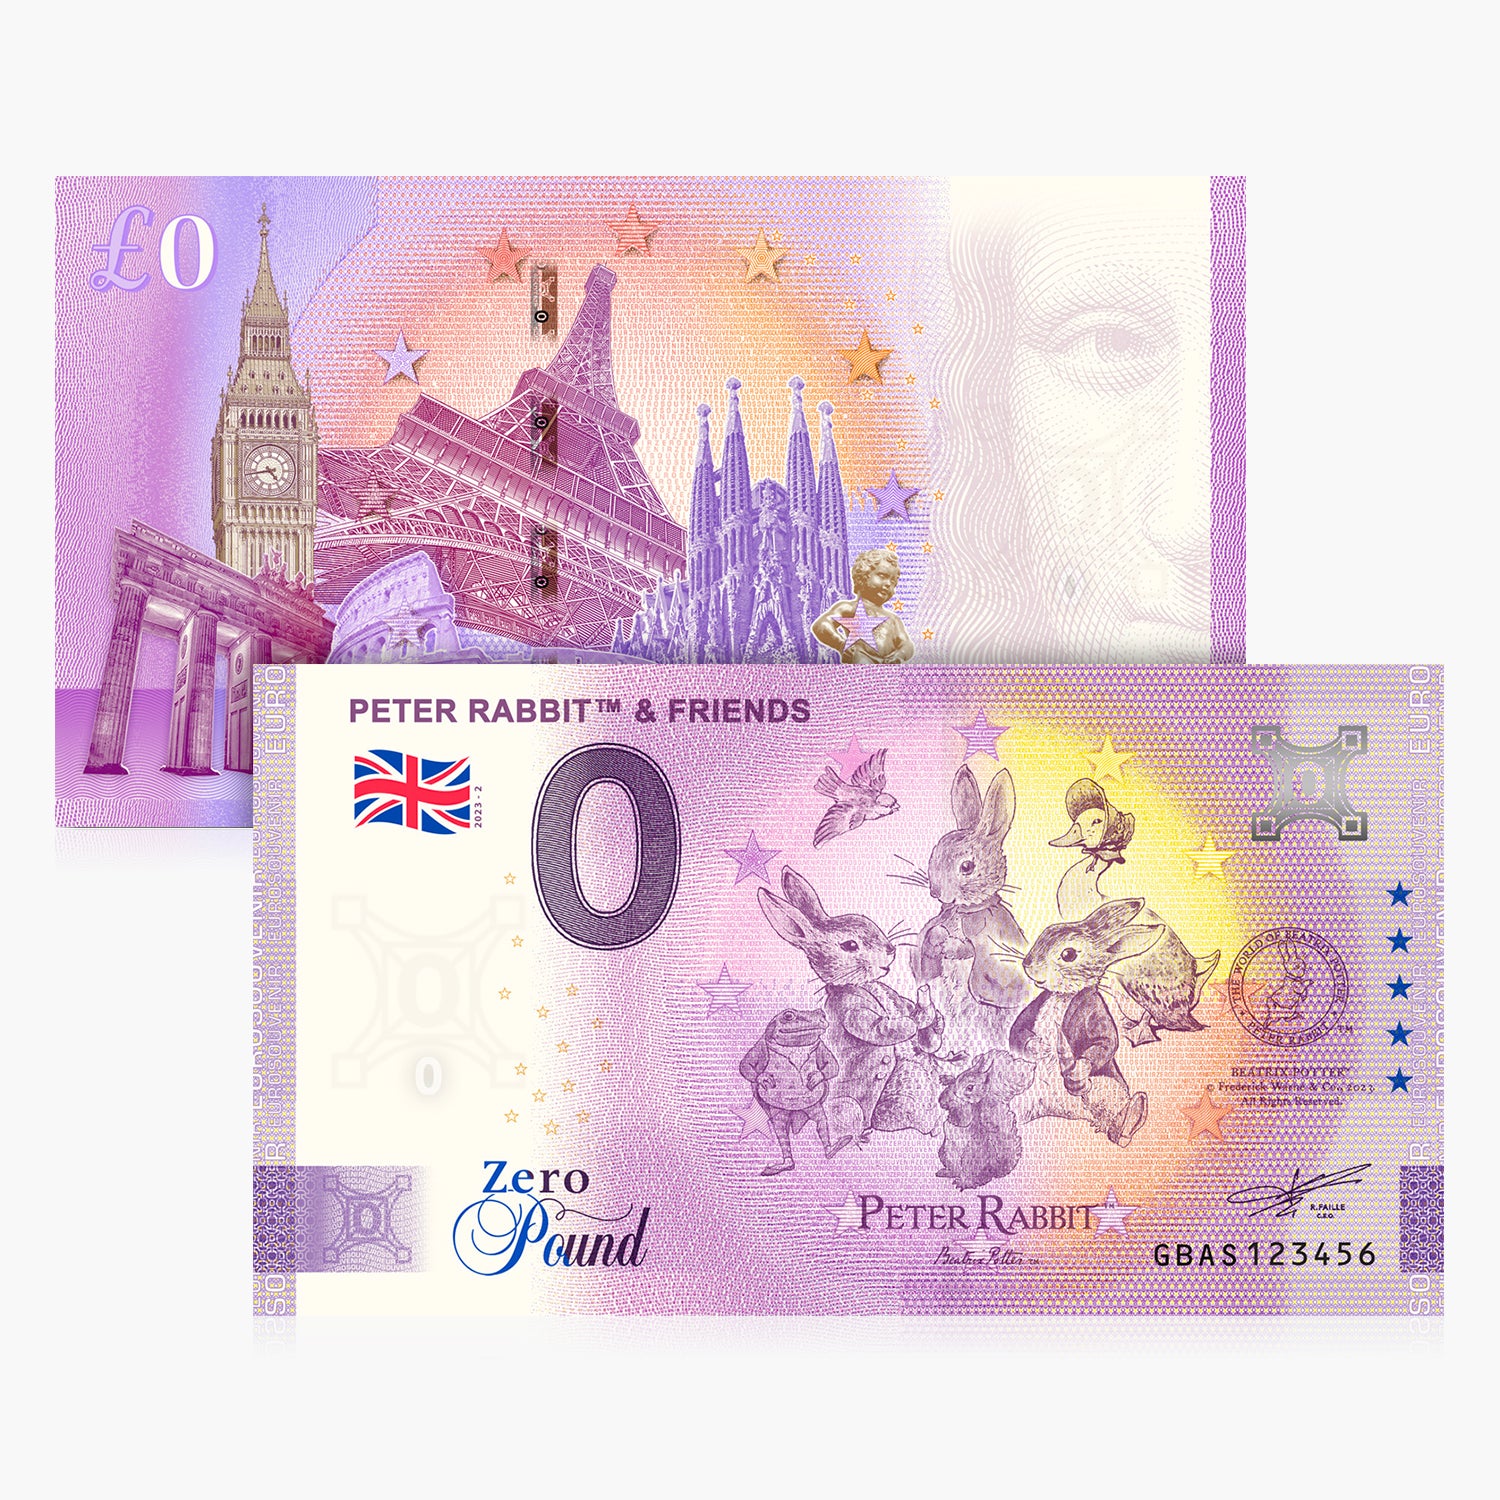 The World of Peter Rabbit and Friends £0 Banknote